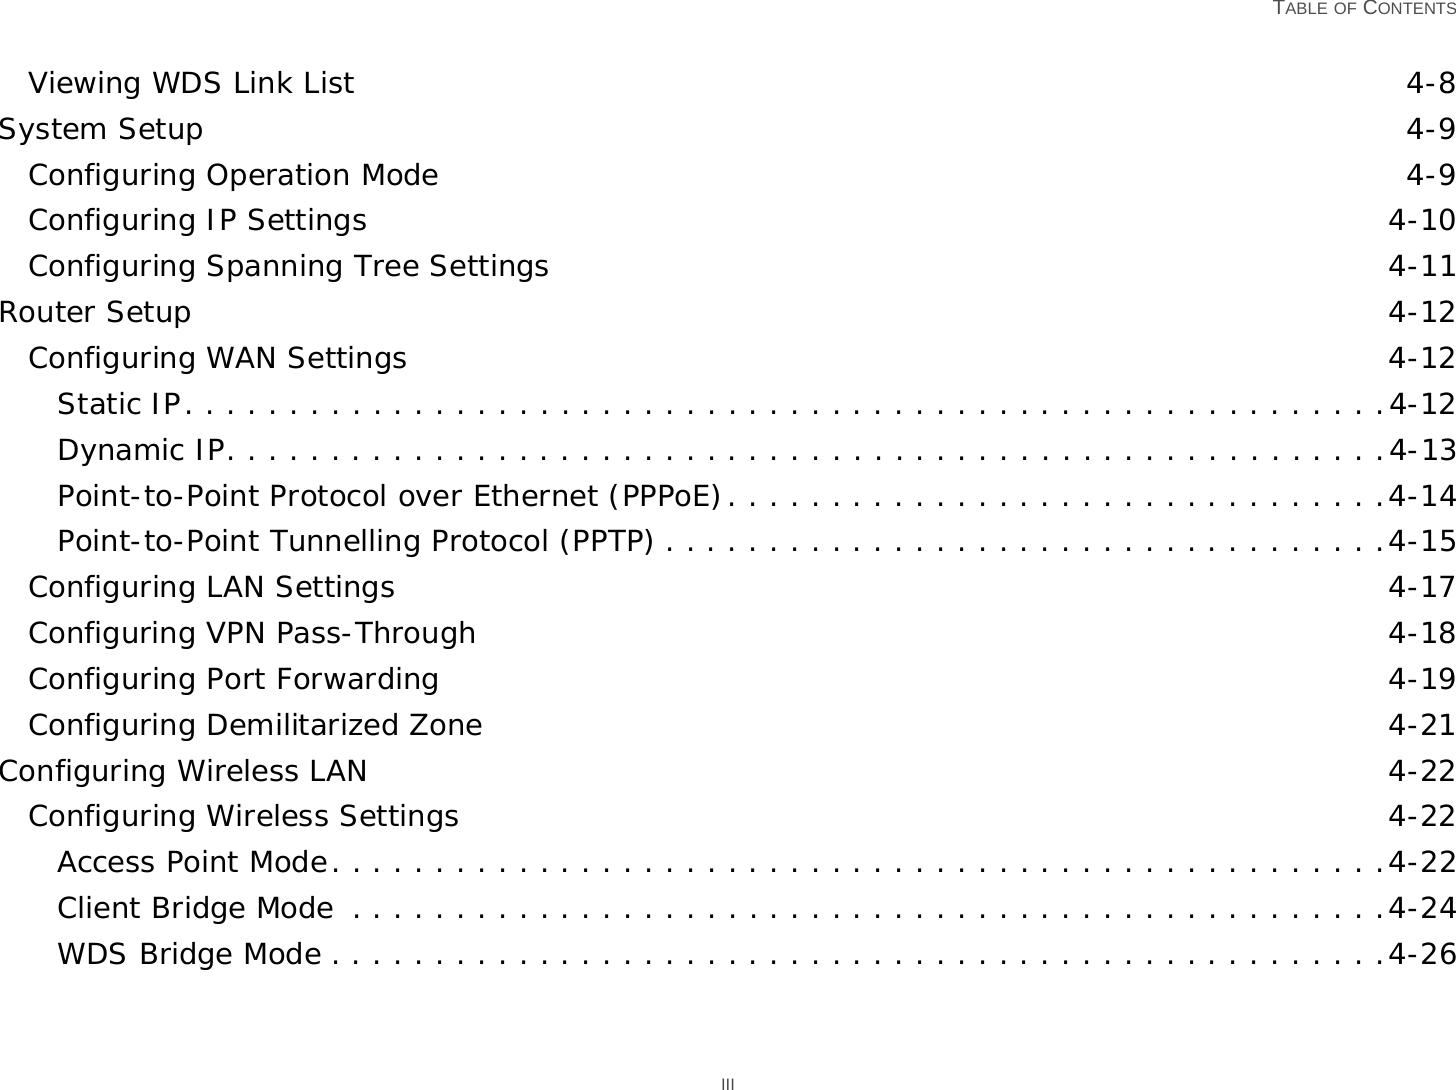   TABLE OF CONTENTS IIIViewing WDS Link List 4-8System Setup 4-9Configuring Operation Mode 4-9Configuring IP Settings 4-10Configuring Spanning Tree Settings 4-11Router Setup 4-12Configuring WAN Settings 4-12Static IP. . . . . . . . . . . . . . . . . . . . . . . . . . . . . . . . . . . . . . . . . . . . . . . . . . . . . . . . . .4-12Dynamic IP. . . . . . . . . . . . . . . . . . . . . . . . . . . . . . . . . . . . . . . . . . . . . . . . . . . . . . . .4-13Point-to-Point Protocol over Ethernet (PPPoE). . . . . . . . . . . . . . . . . . . . . . . . . . . . . . . .4-14Point-to-Point Tunnelling Protocol (PPTP) . . . . . . . . . . . . . . . . . . . . . . . . . . . . . . . . . . .4-15Configuring LAN Settings 4-17Configuring VPN Pass-Through 4-18Configuring Port Forwarding 4-19Configuring Demilitarized Zone 4-21Configuring Wireless LAN 4-22Configuring Wireless Settings 4-22Access Point Mode. . . . . . . . . . . . . . . . . . . . . . . . . . . . . . . . . . . . . . . . . . . . . . . . . . .4-22Client Bridge Mode  . . . . . . . . . . . . . . . . . . . . . . . . . . . . . . . . . . . . . . . . . . . . . . . . . .4-24WDS Bridge Mode . . . . . . . . . . . . . . . . . . . . . . . . . . . . . . . . . . . . . . . . . . . . . . . . . . .4-26